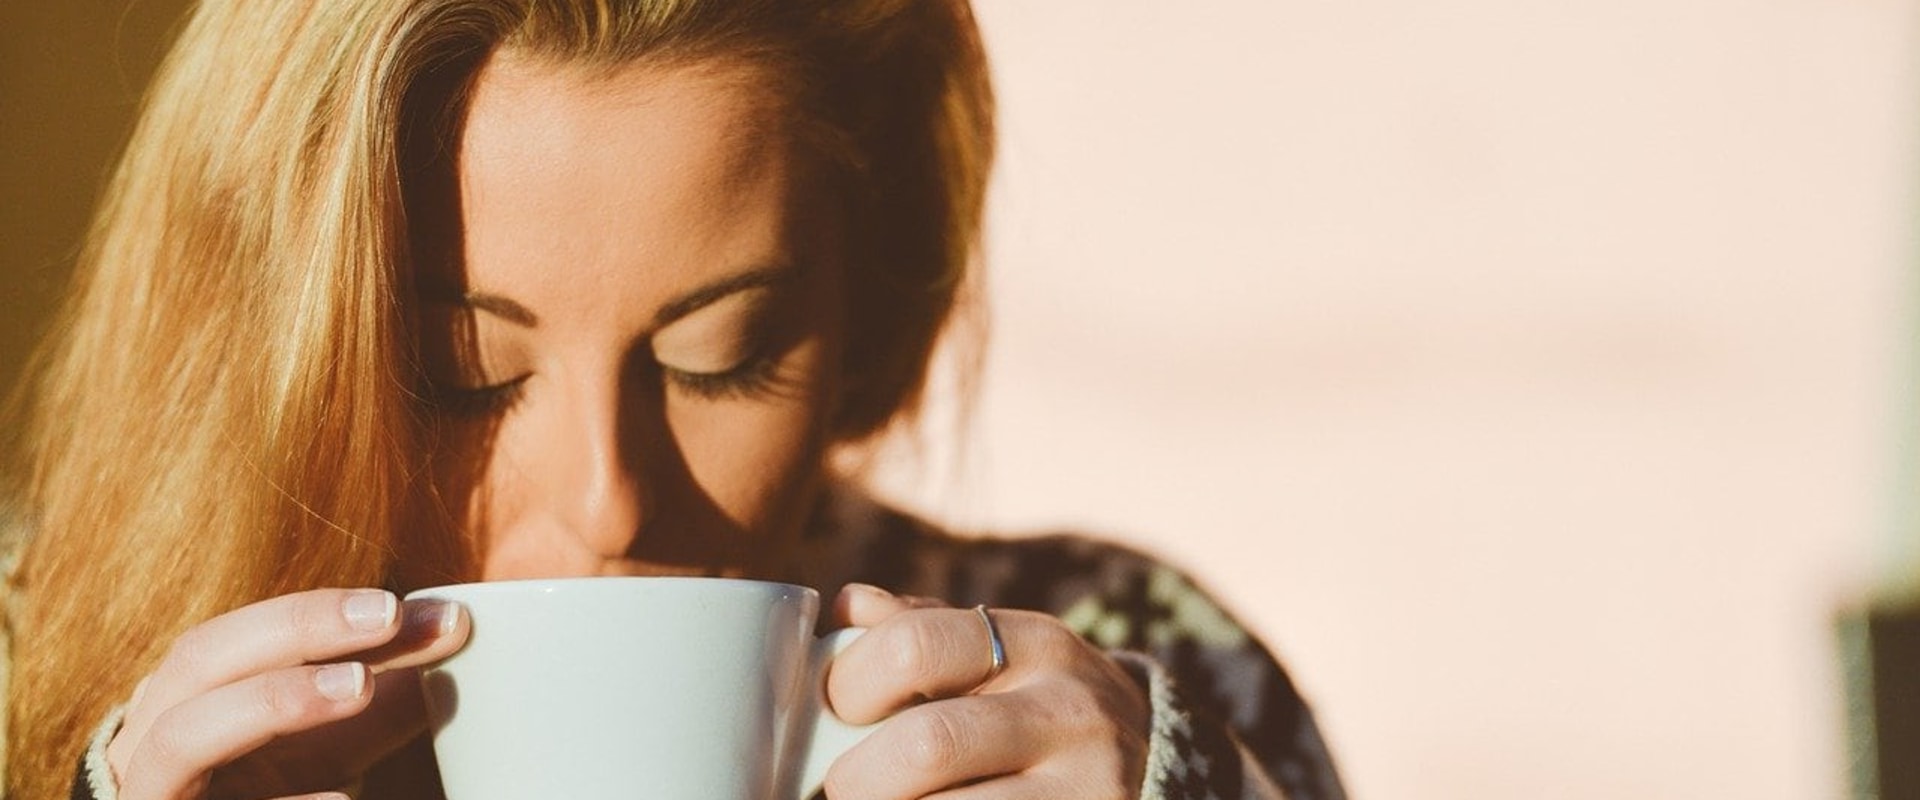 Why does coffee make you urinate?